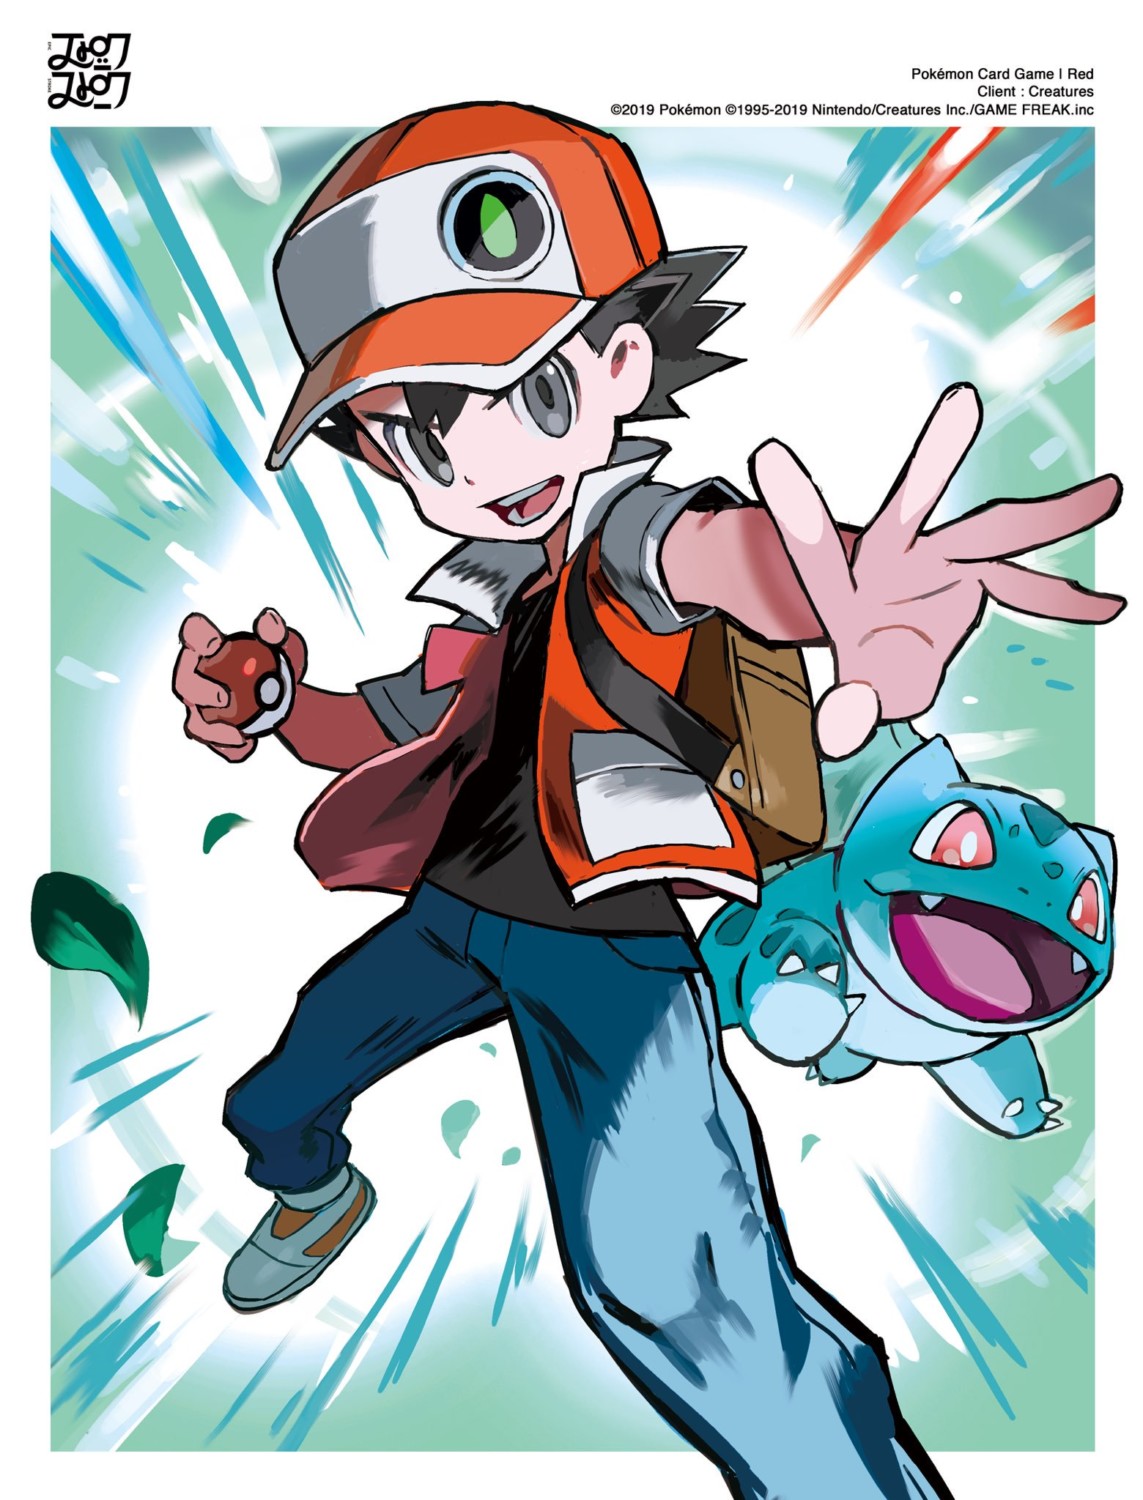 High-Quality For Red, And Green Pokemon TCG Cards Released – NintendoSoup